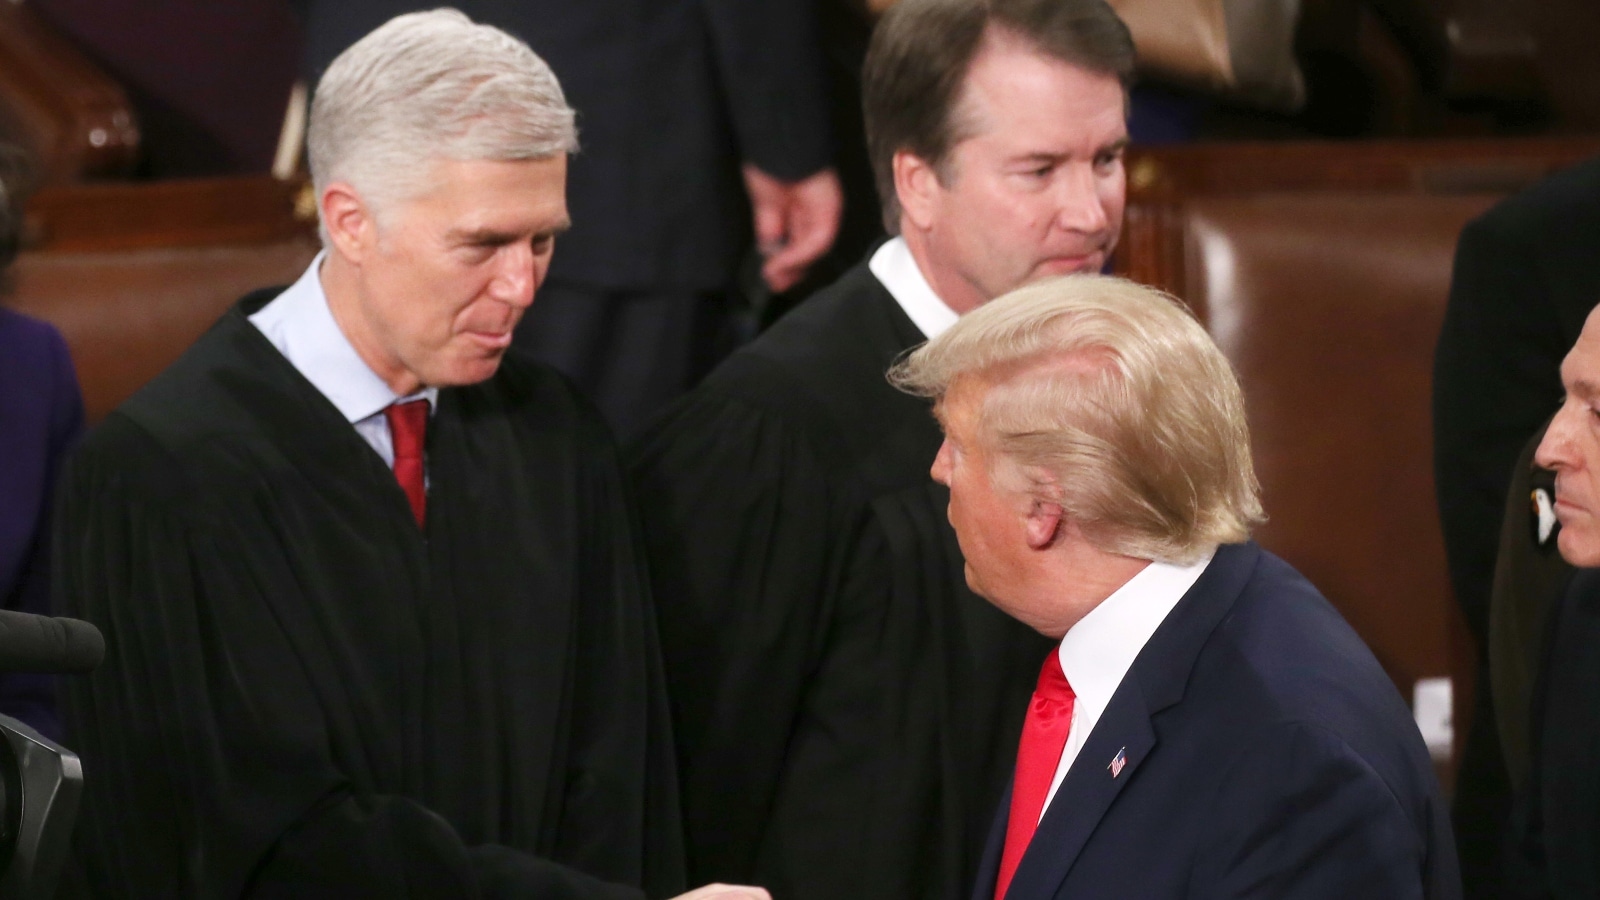 Justice Gorsuch Urges Caution During Trump’s Legal Hearing